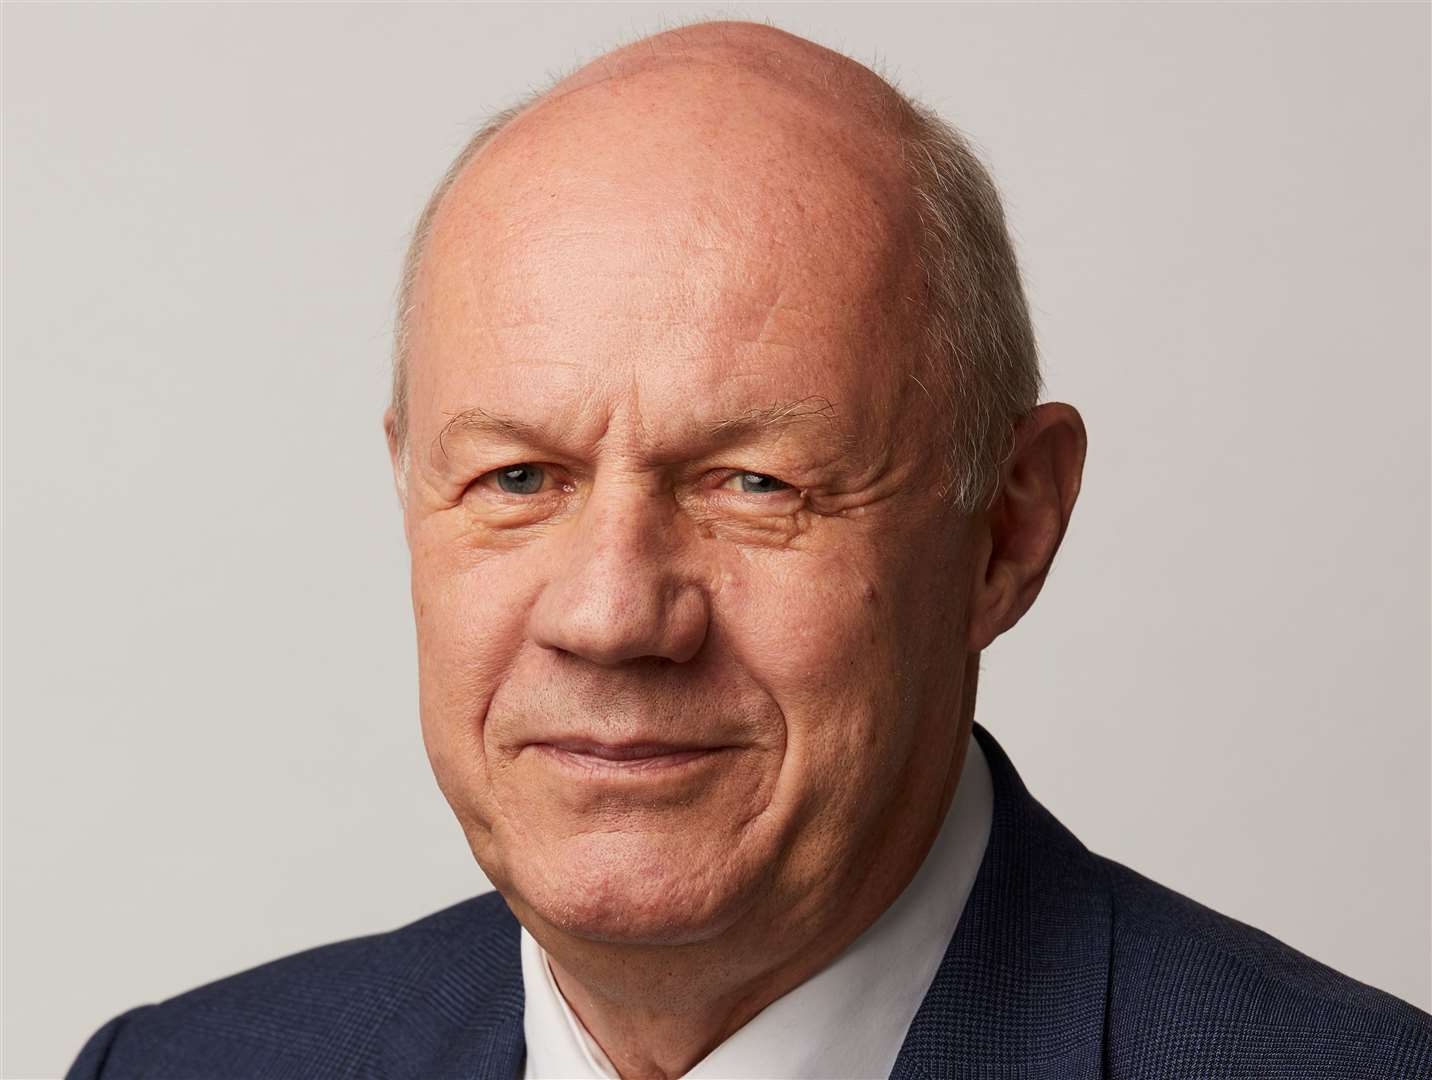 Ashford MP Damian Green says he shares residents' concerns